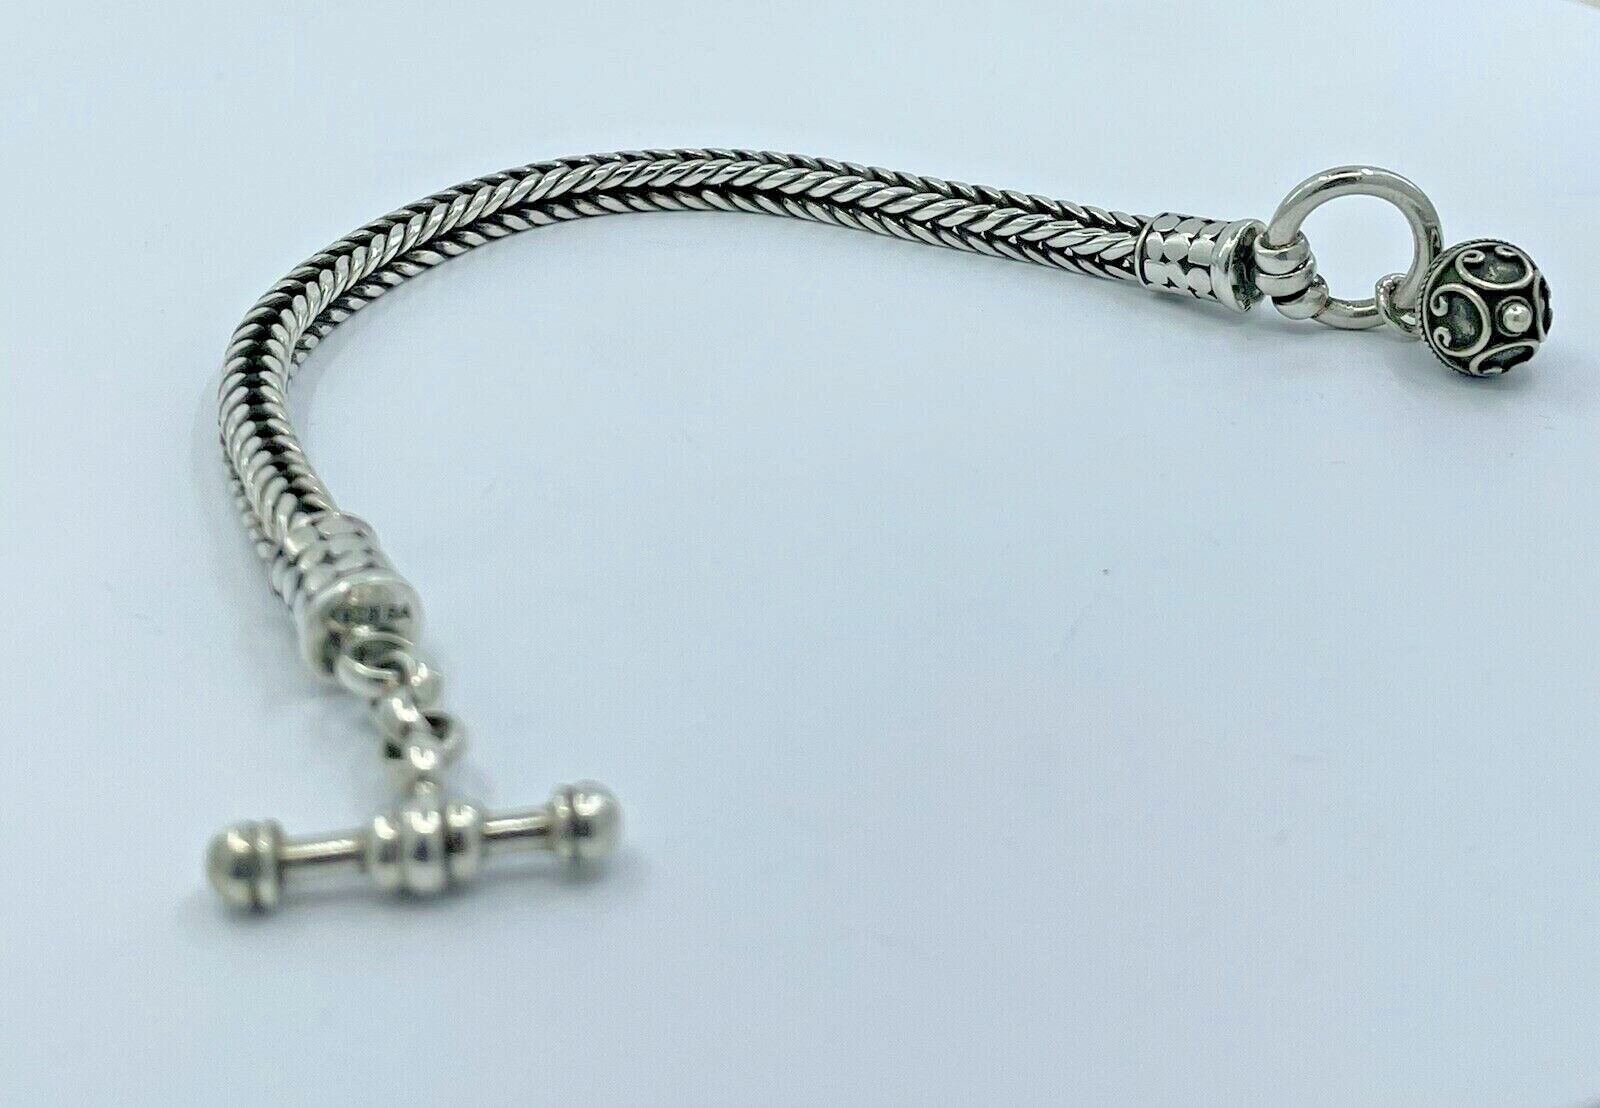 It is very popular BA Suarti 925 Sterling Woven Bracelet 33.8 g Dangling Free shipping on posting reviews w Bead